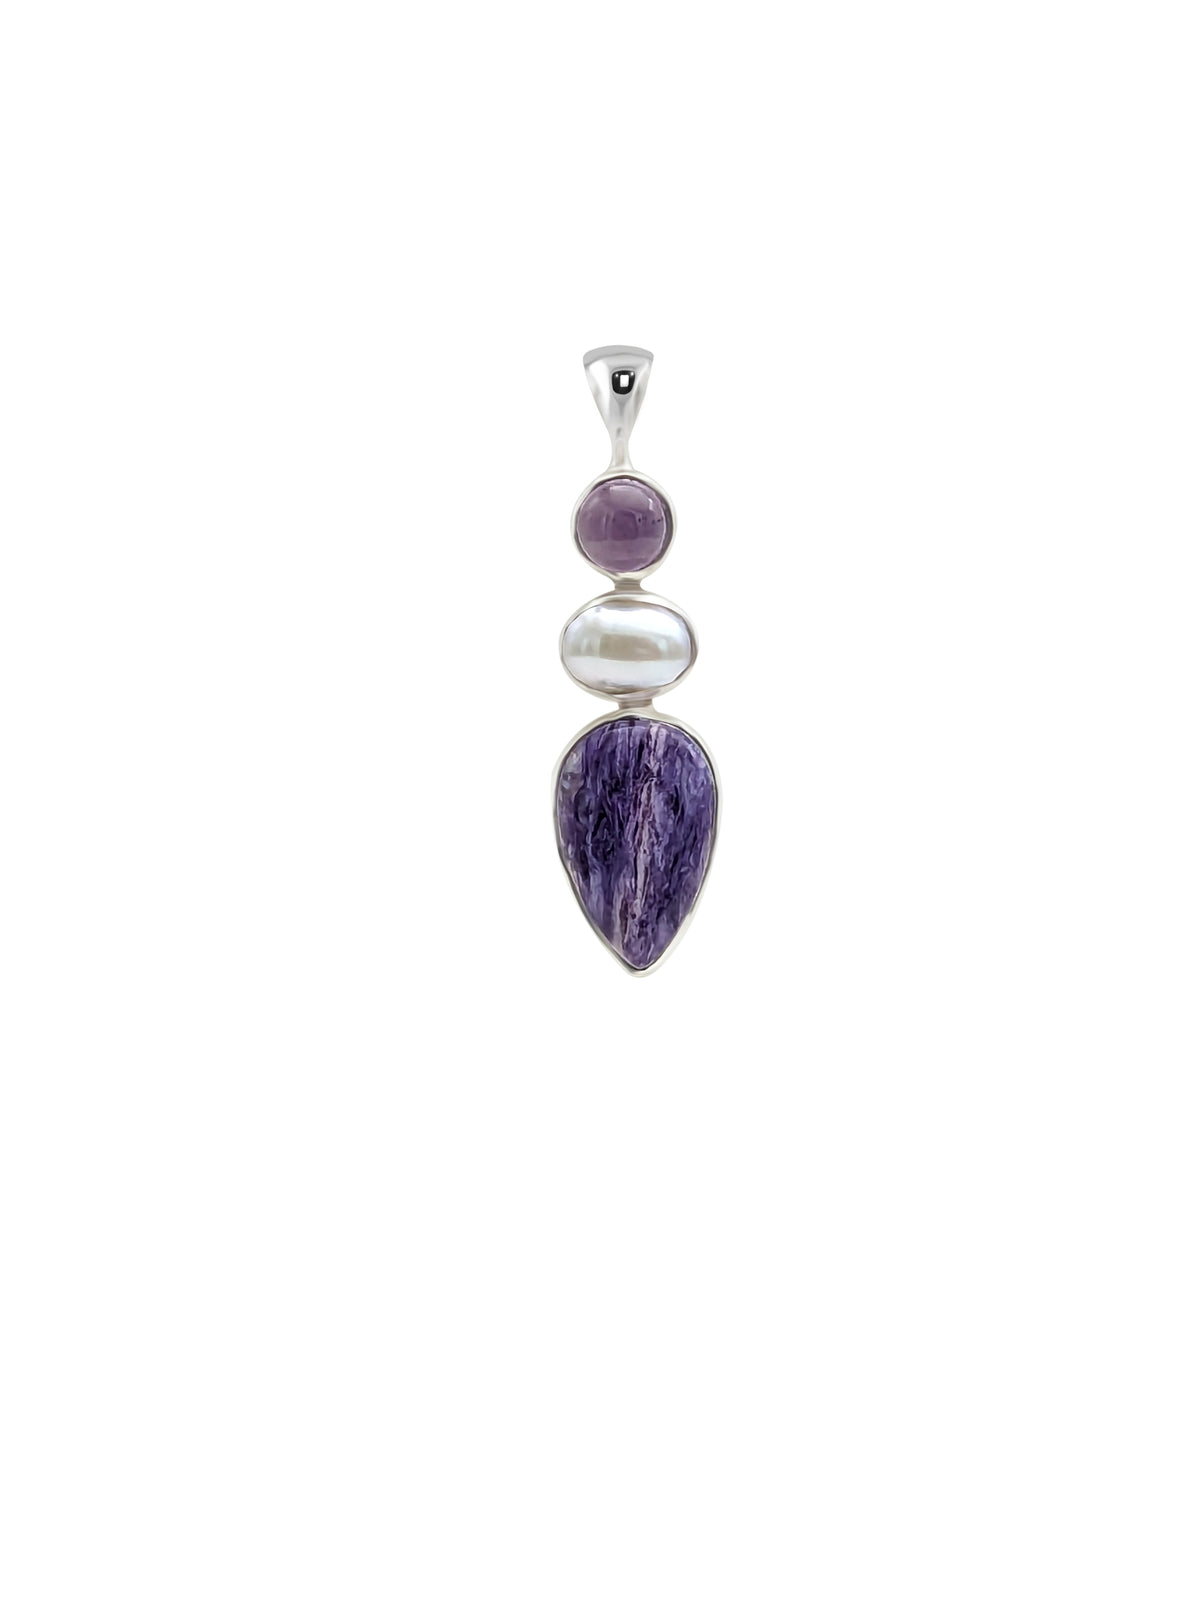 Designer Charoite Pendant Studded With Pearl, Amethyst Pack of 1 (D23-8)